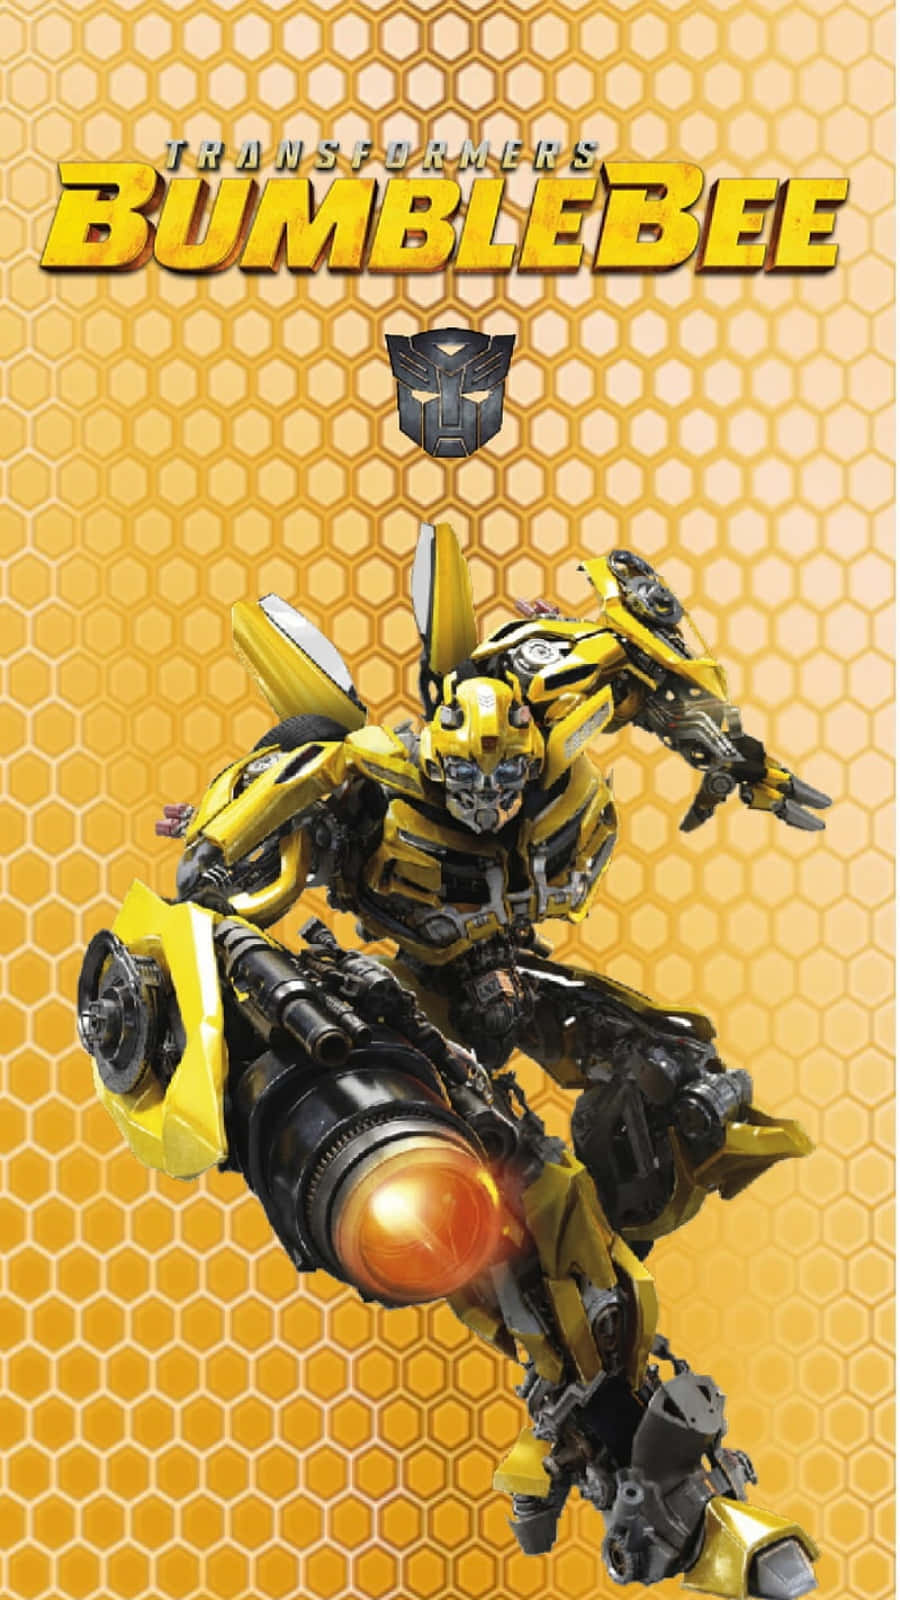 A closeup of Bumblebee's iconic yellow and black aesthetic